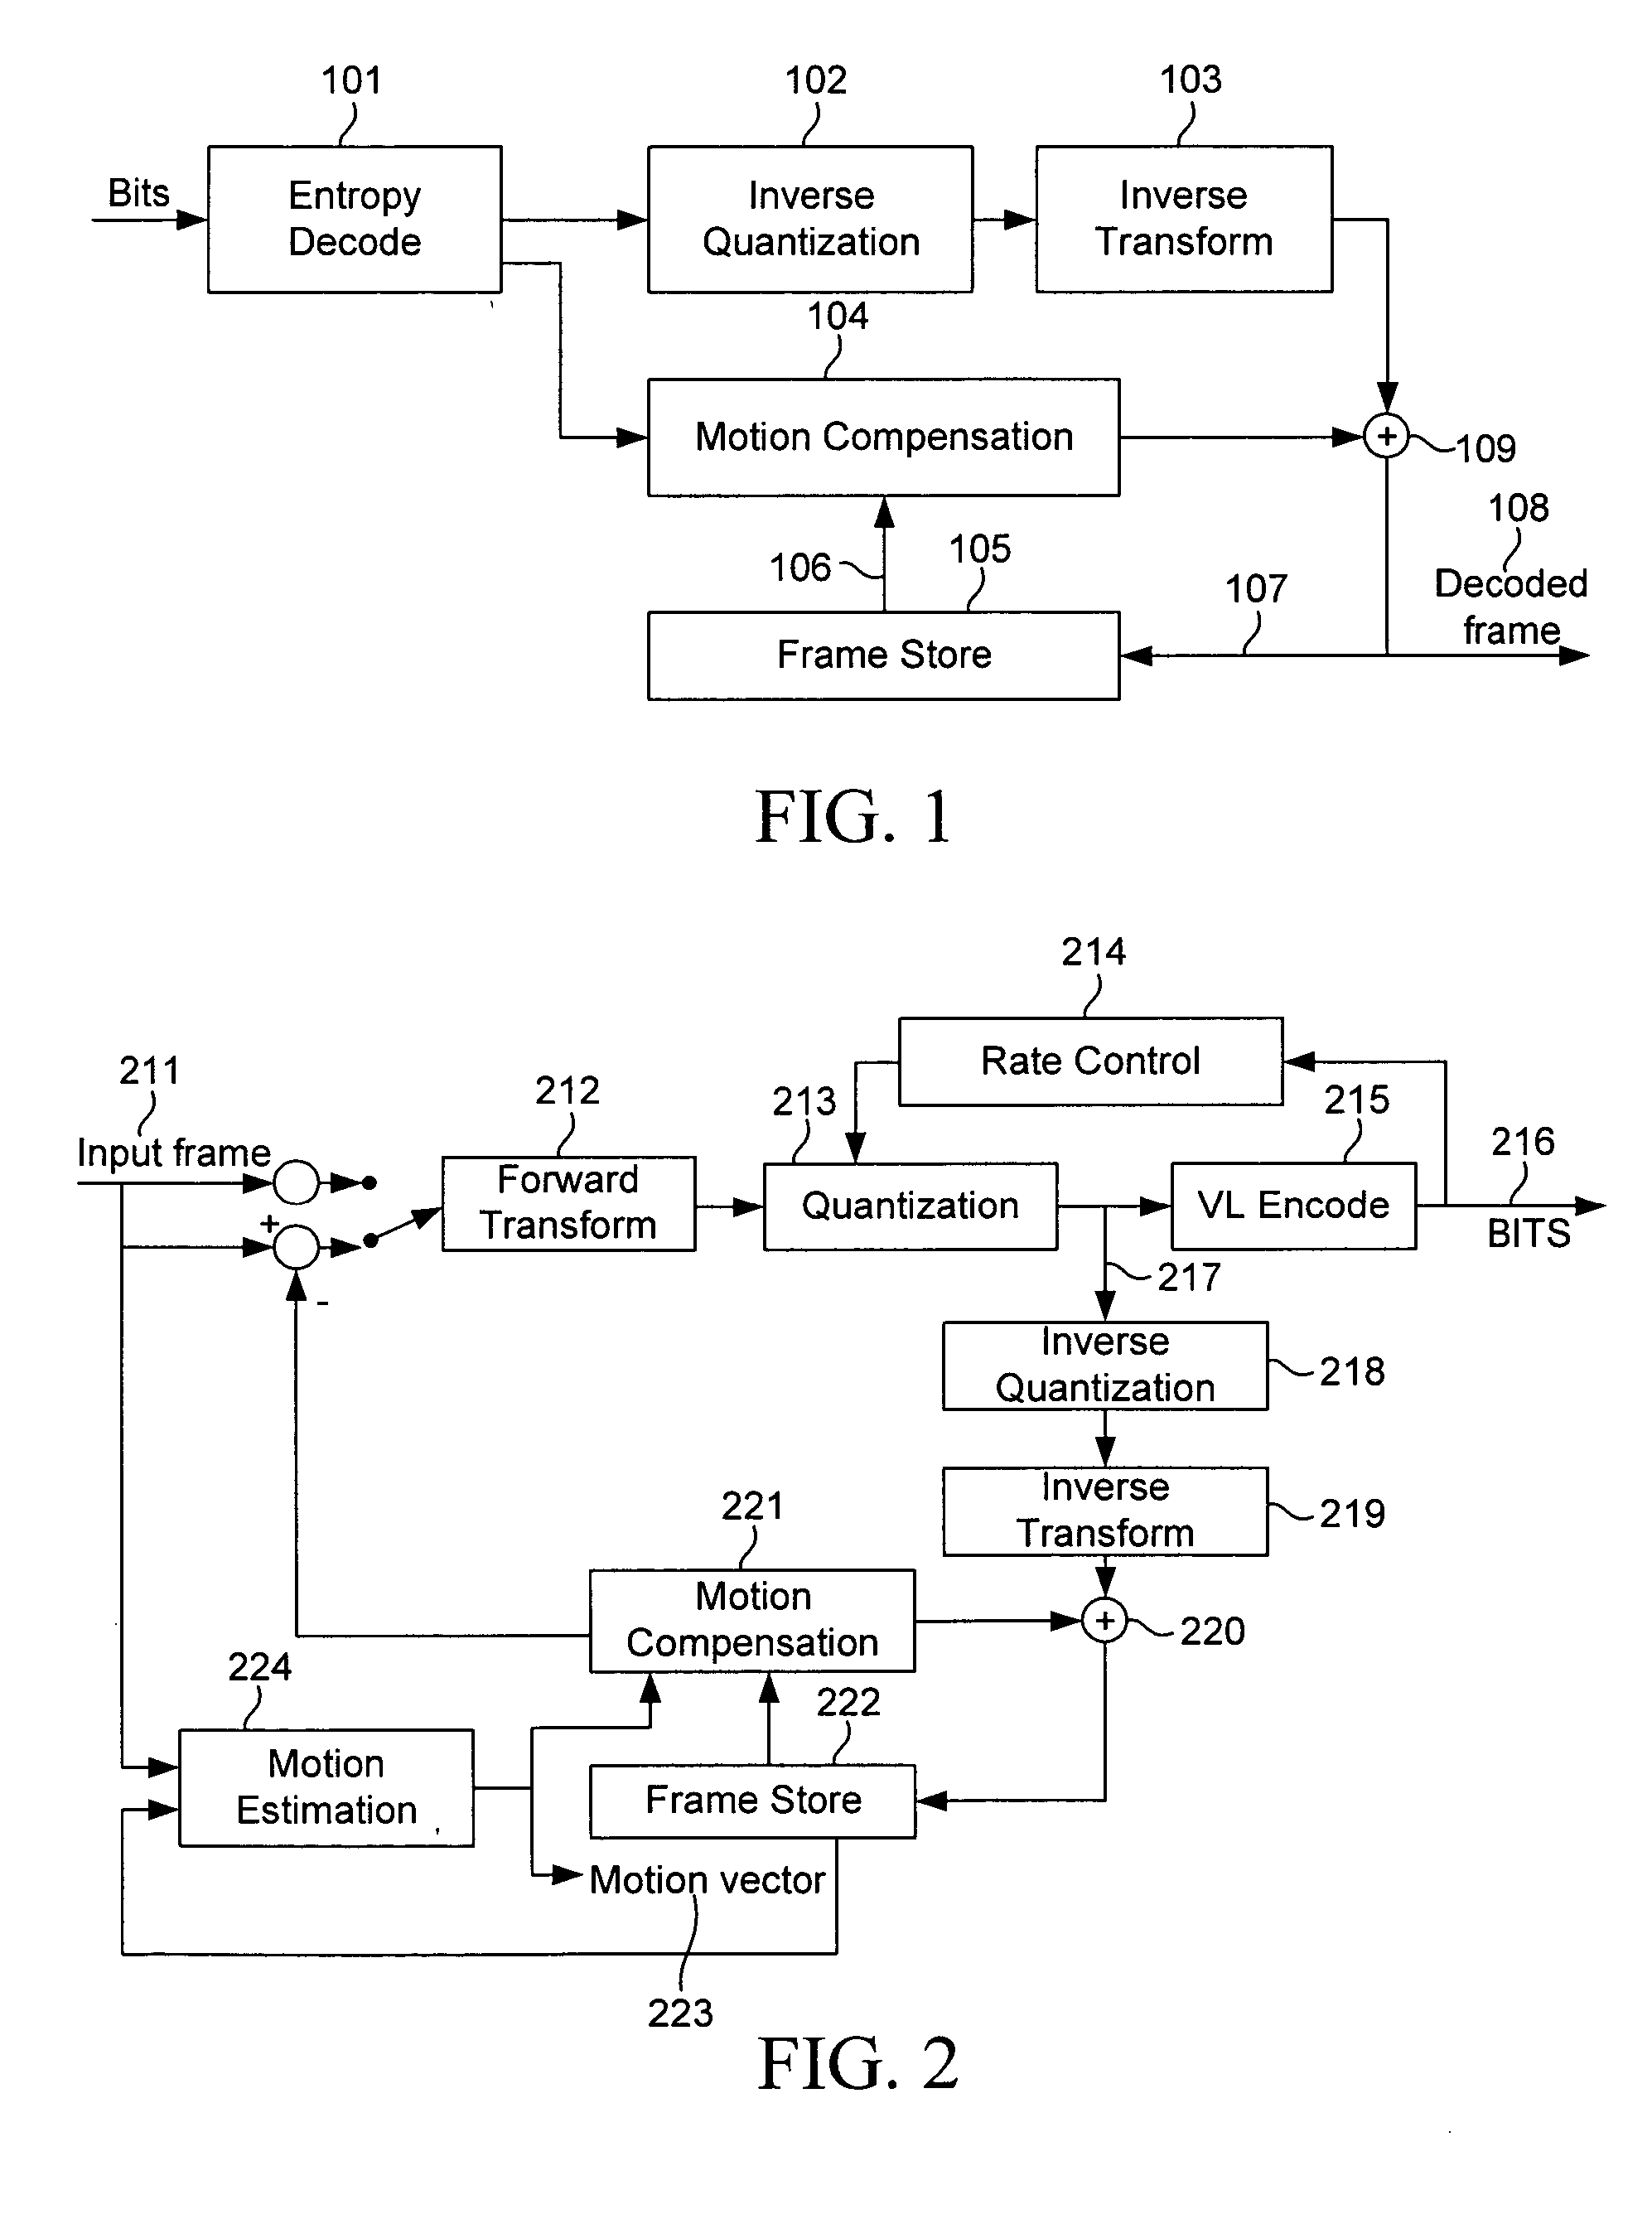 Multi-threaded processing design in architecture with multiple co-processors